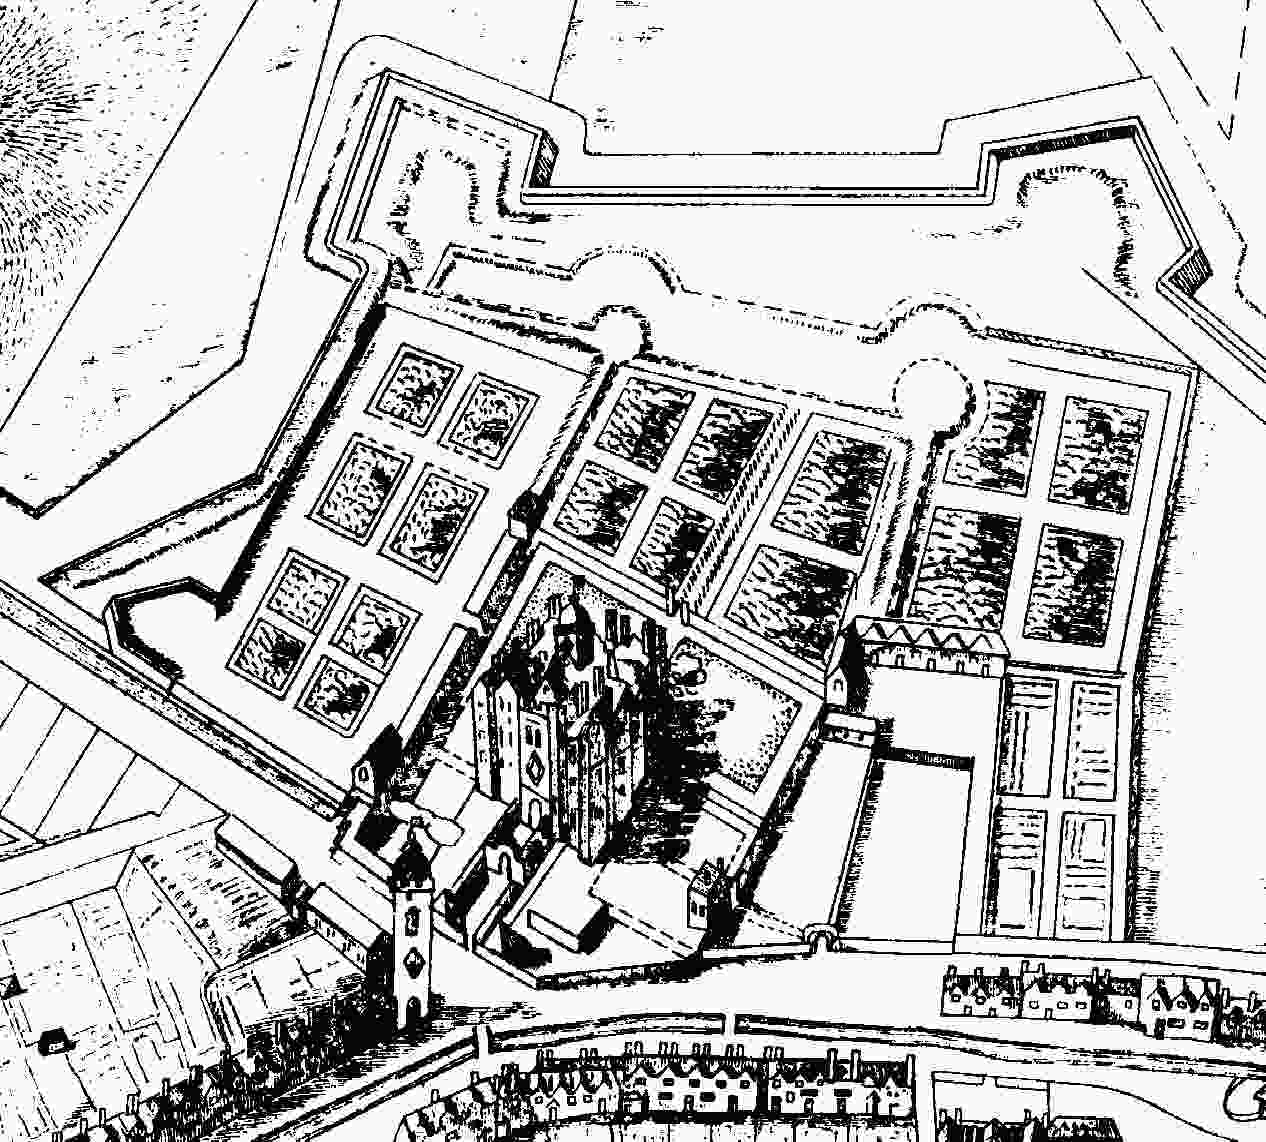 Belfast Castle from Thomas Phillips' map, 1685